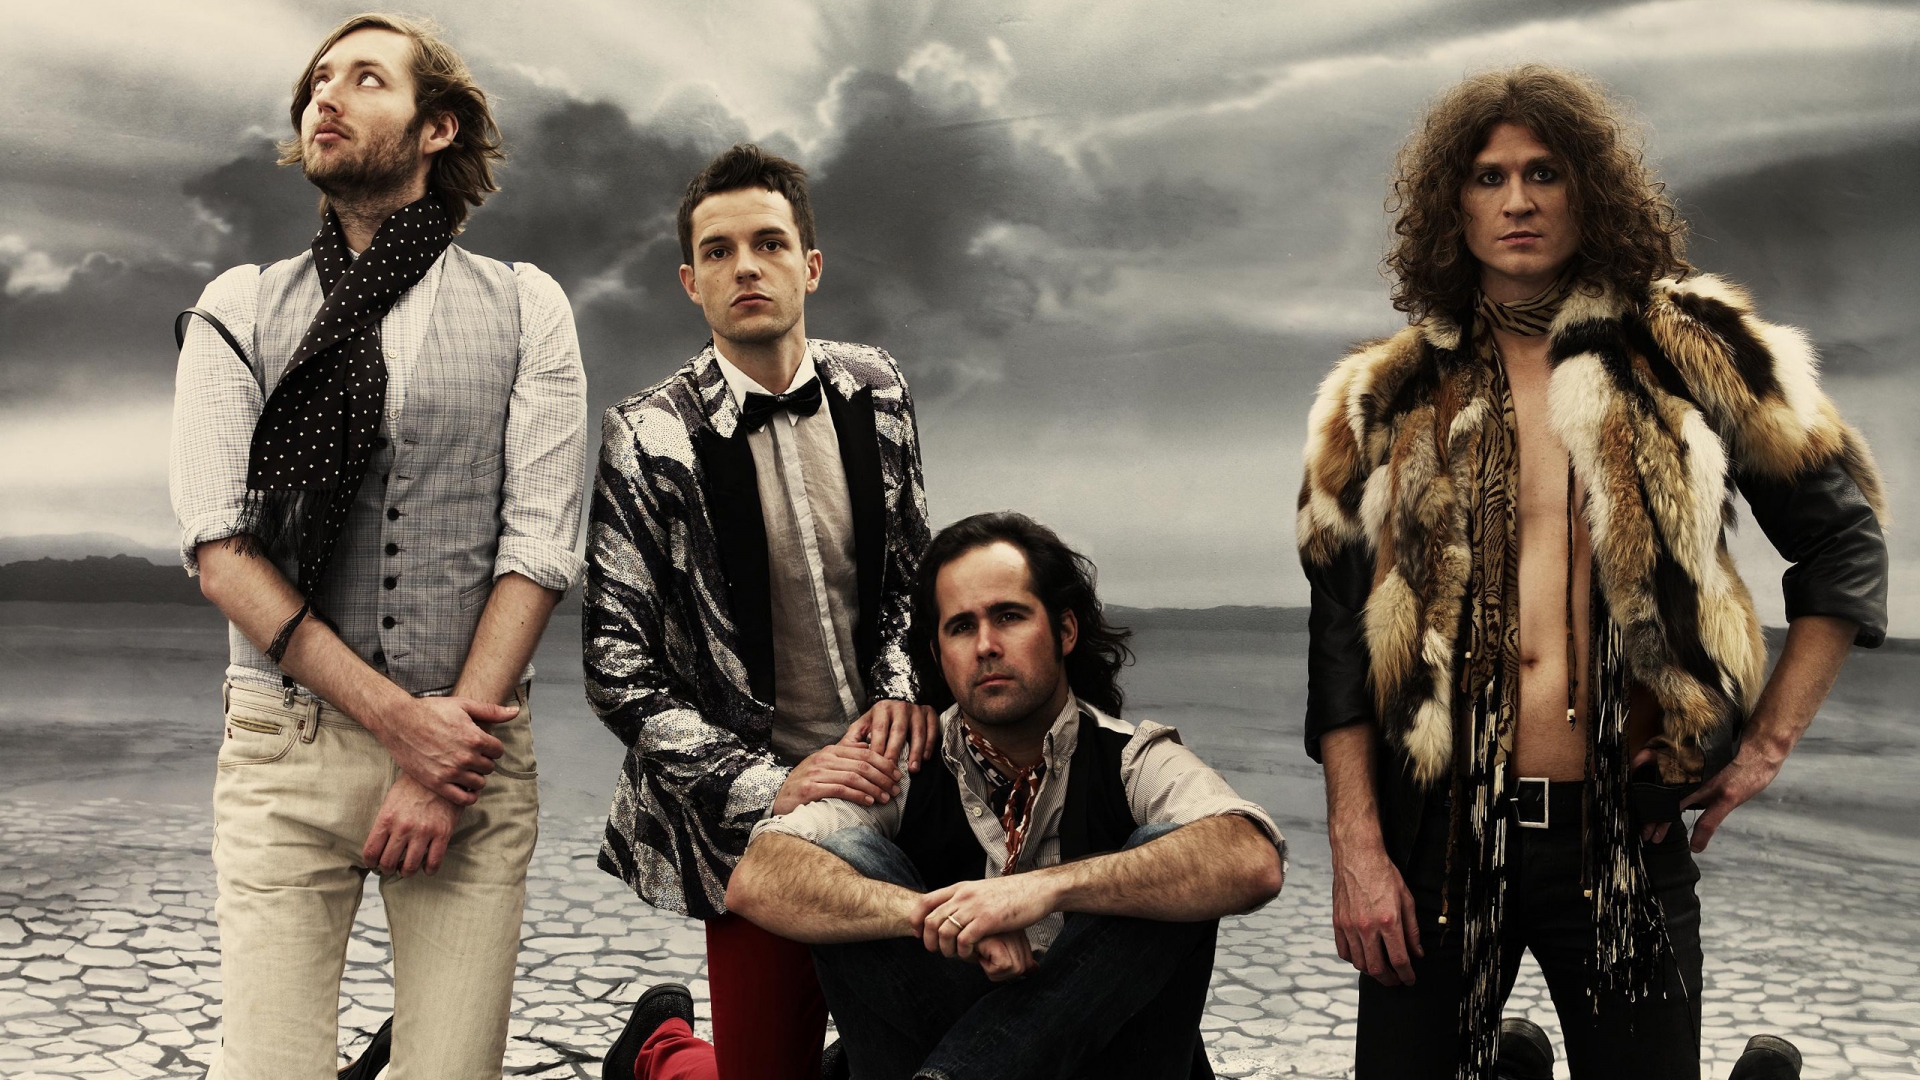 The Killers for 1920 x 1080 HDTV 1080p resolution